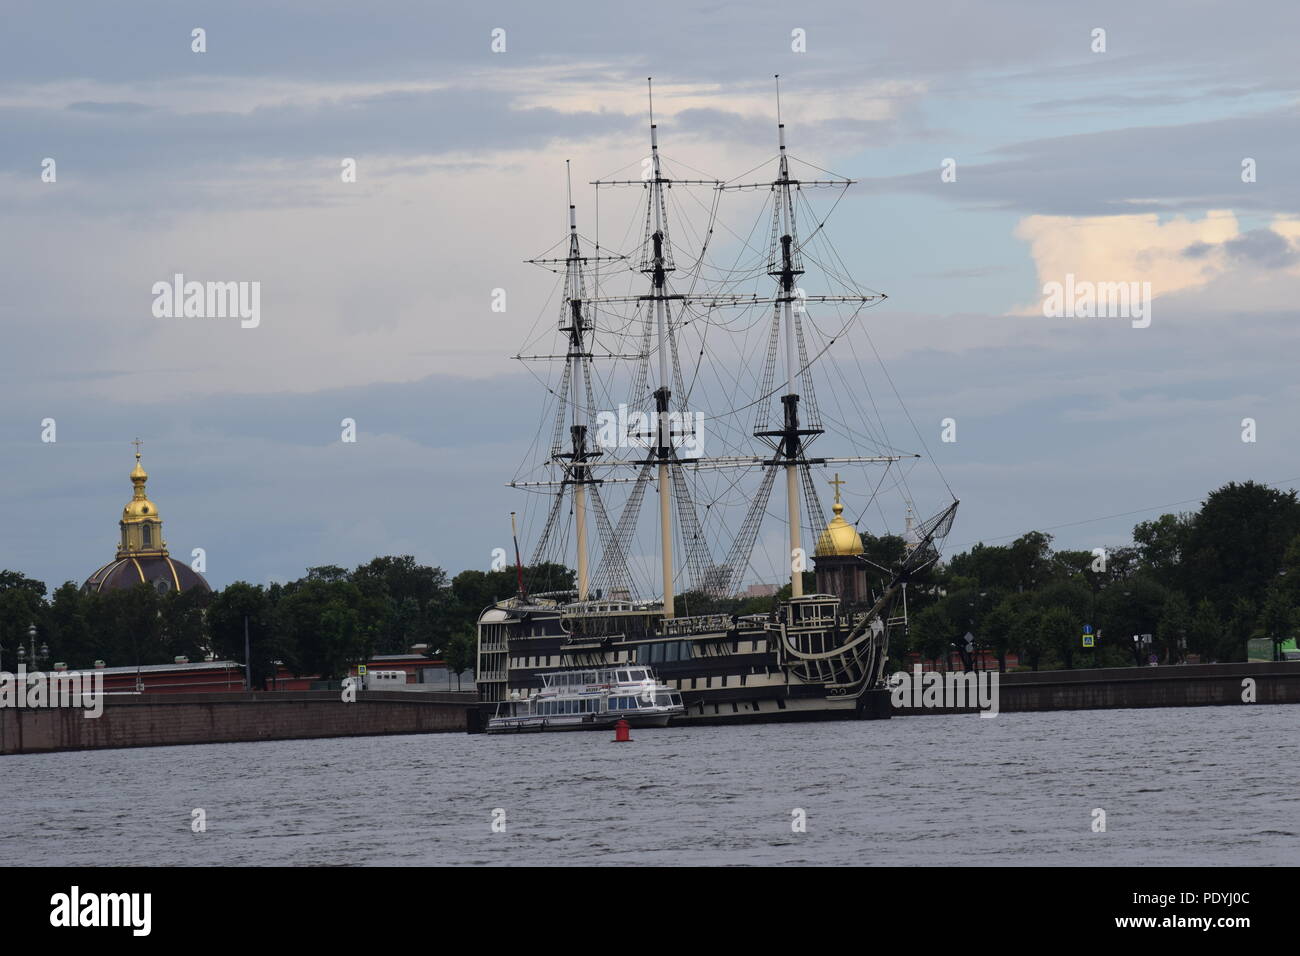 Converted Ship in St. Petersburg, Russia Stock Photo